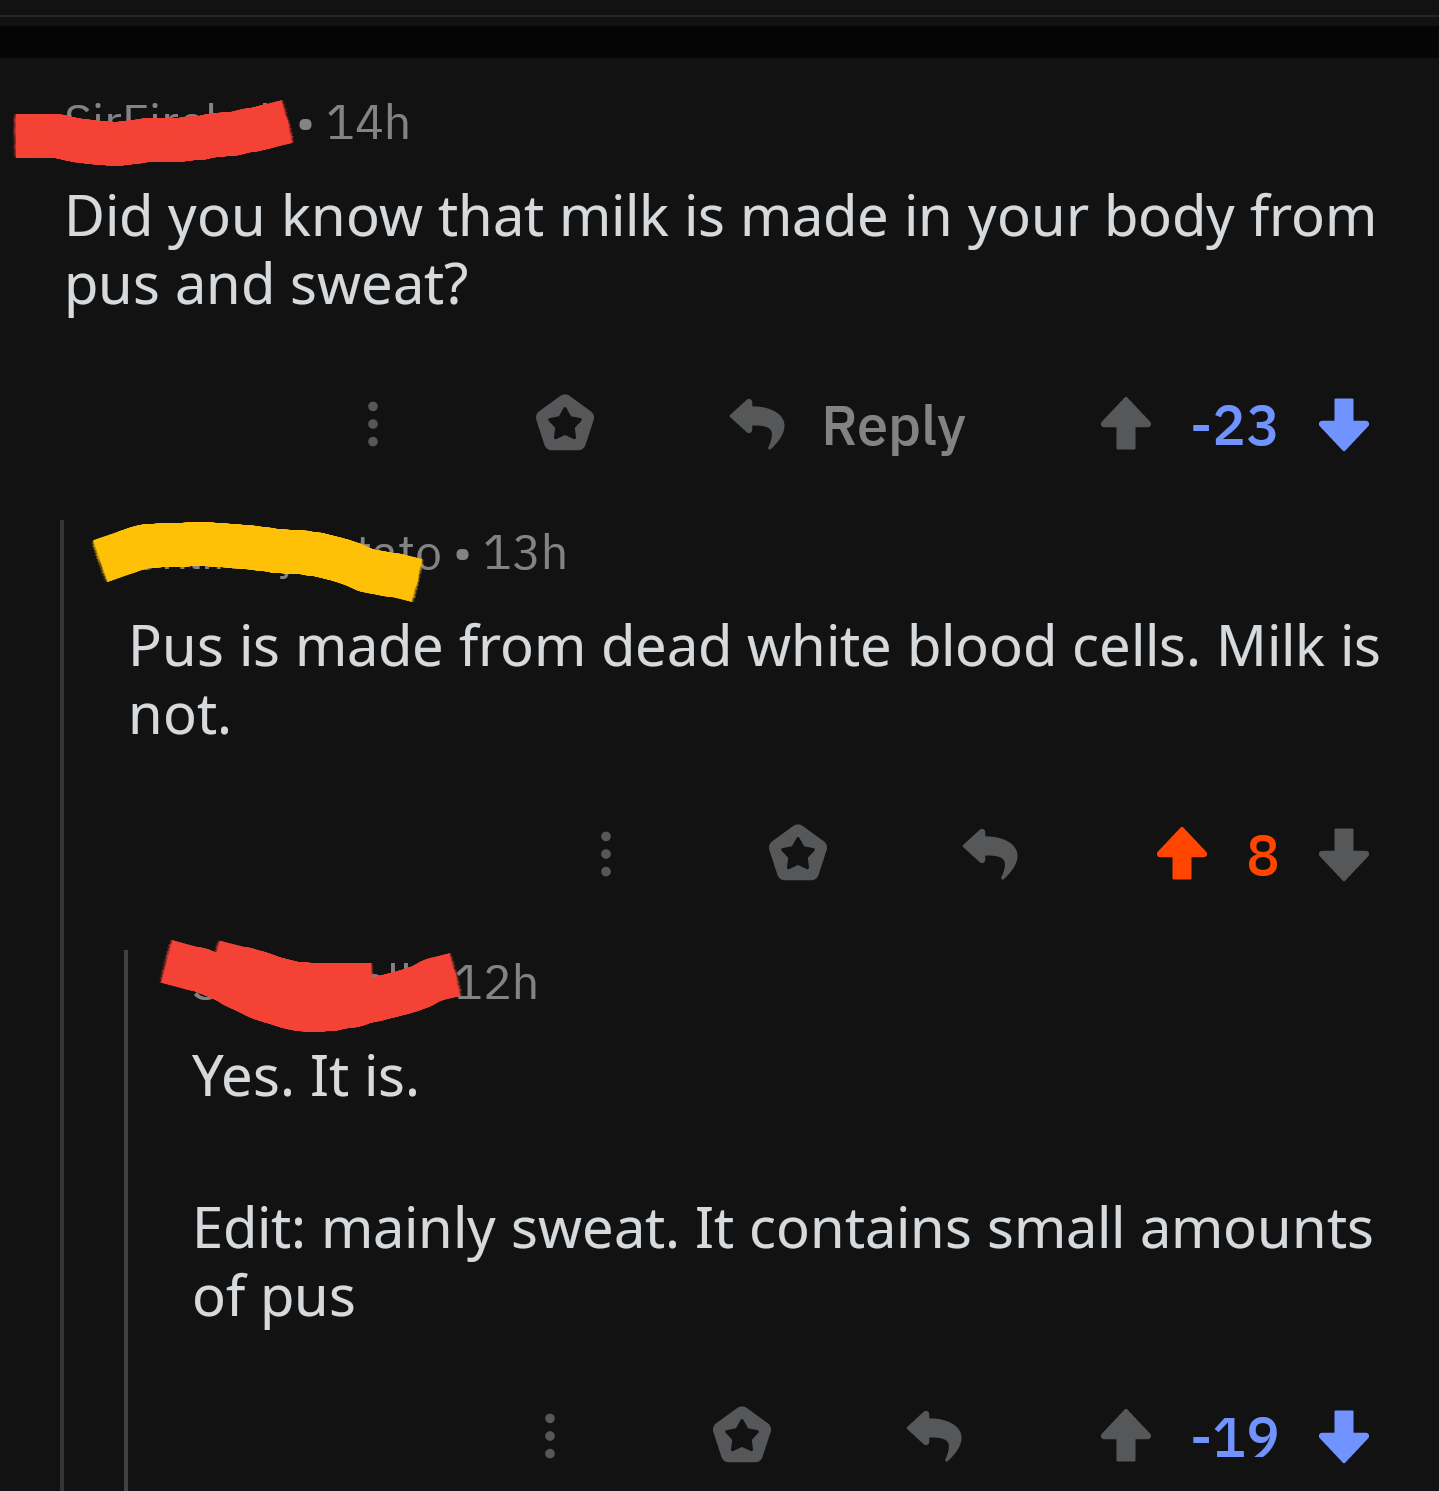 sirri 14h Did you know that milk is made in your body from pus and sweat? ' 4 23 13h Pus is made from dead white blood cells. Milk is not. i 5 8 1 12h Yes. It is. Edit mainly sweat. It contains small amounts of pus E 5 19